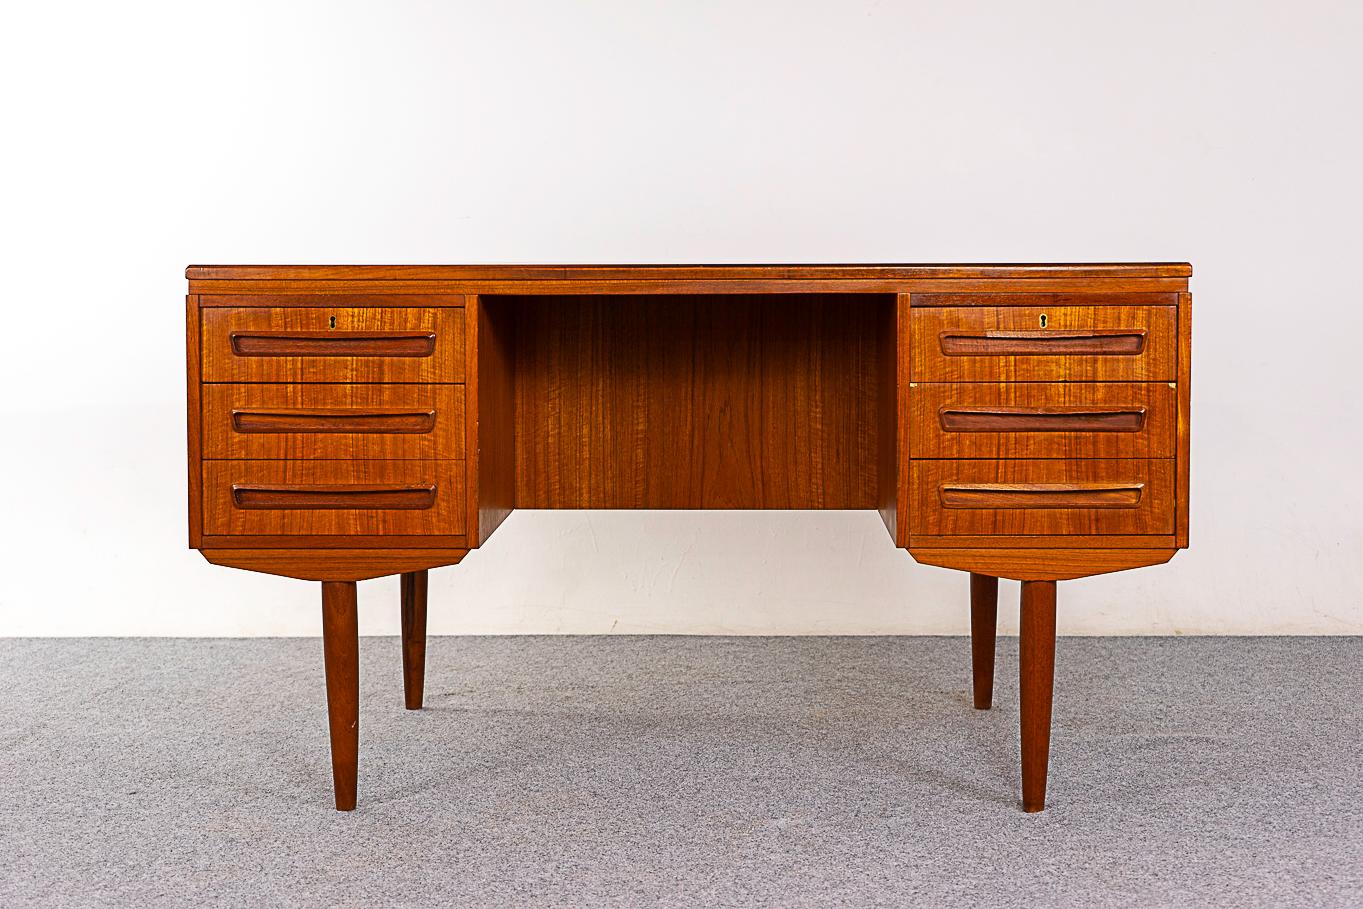 Teak mid-century Danish desk, circa 1960's. Finished on both sides, this beauty looks great from every angle! Sleek tapering legs, integrated low profile handles and ample storage. Sweet drop down compartment on the back side, maybe a mini